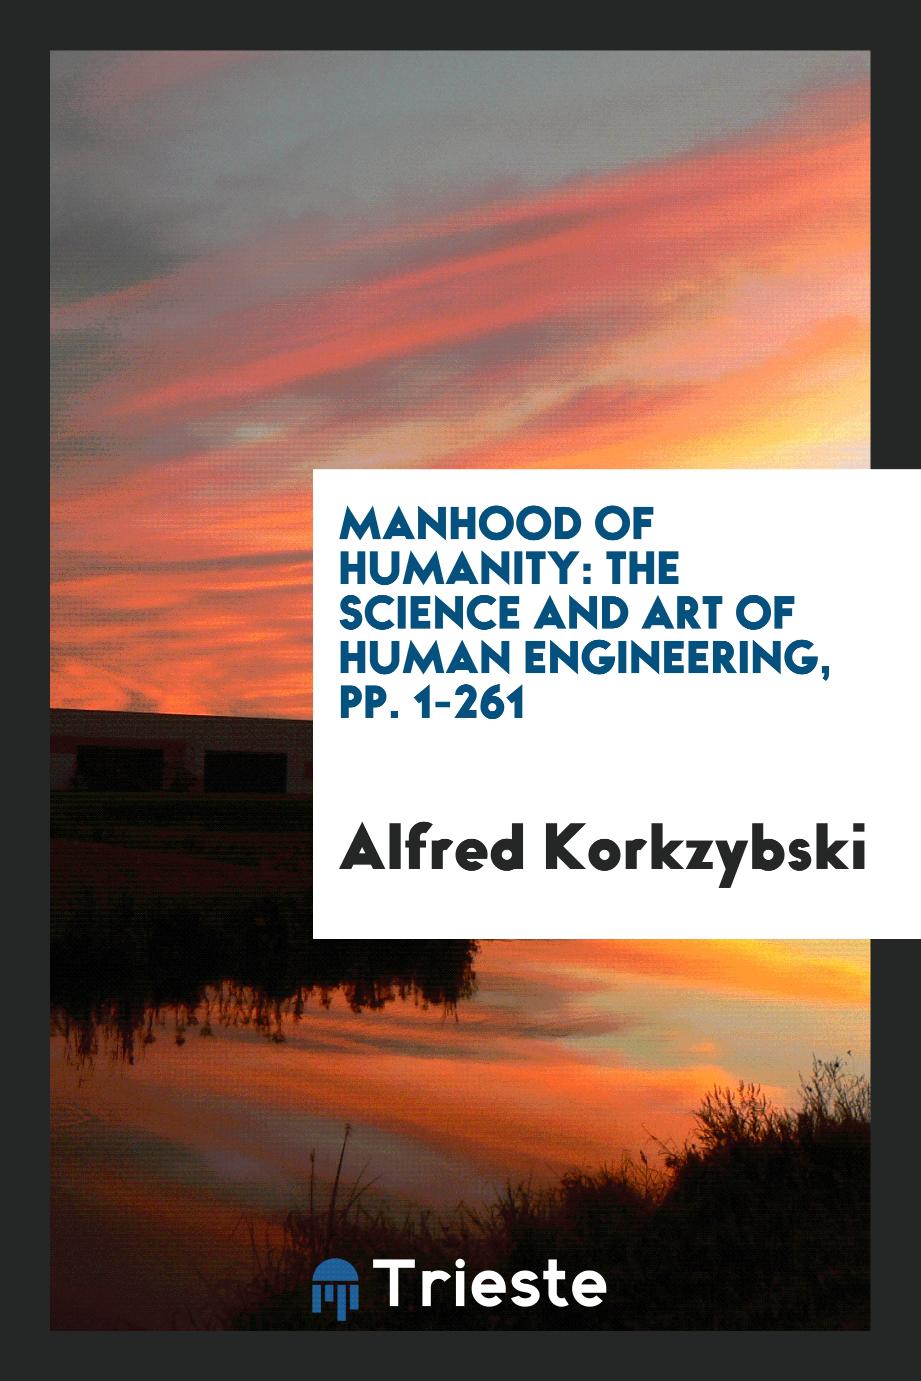 Manhood of Humanity: The Science and Art of Human Engineering, pp. 1-261